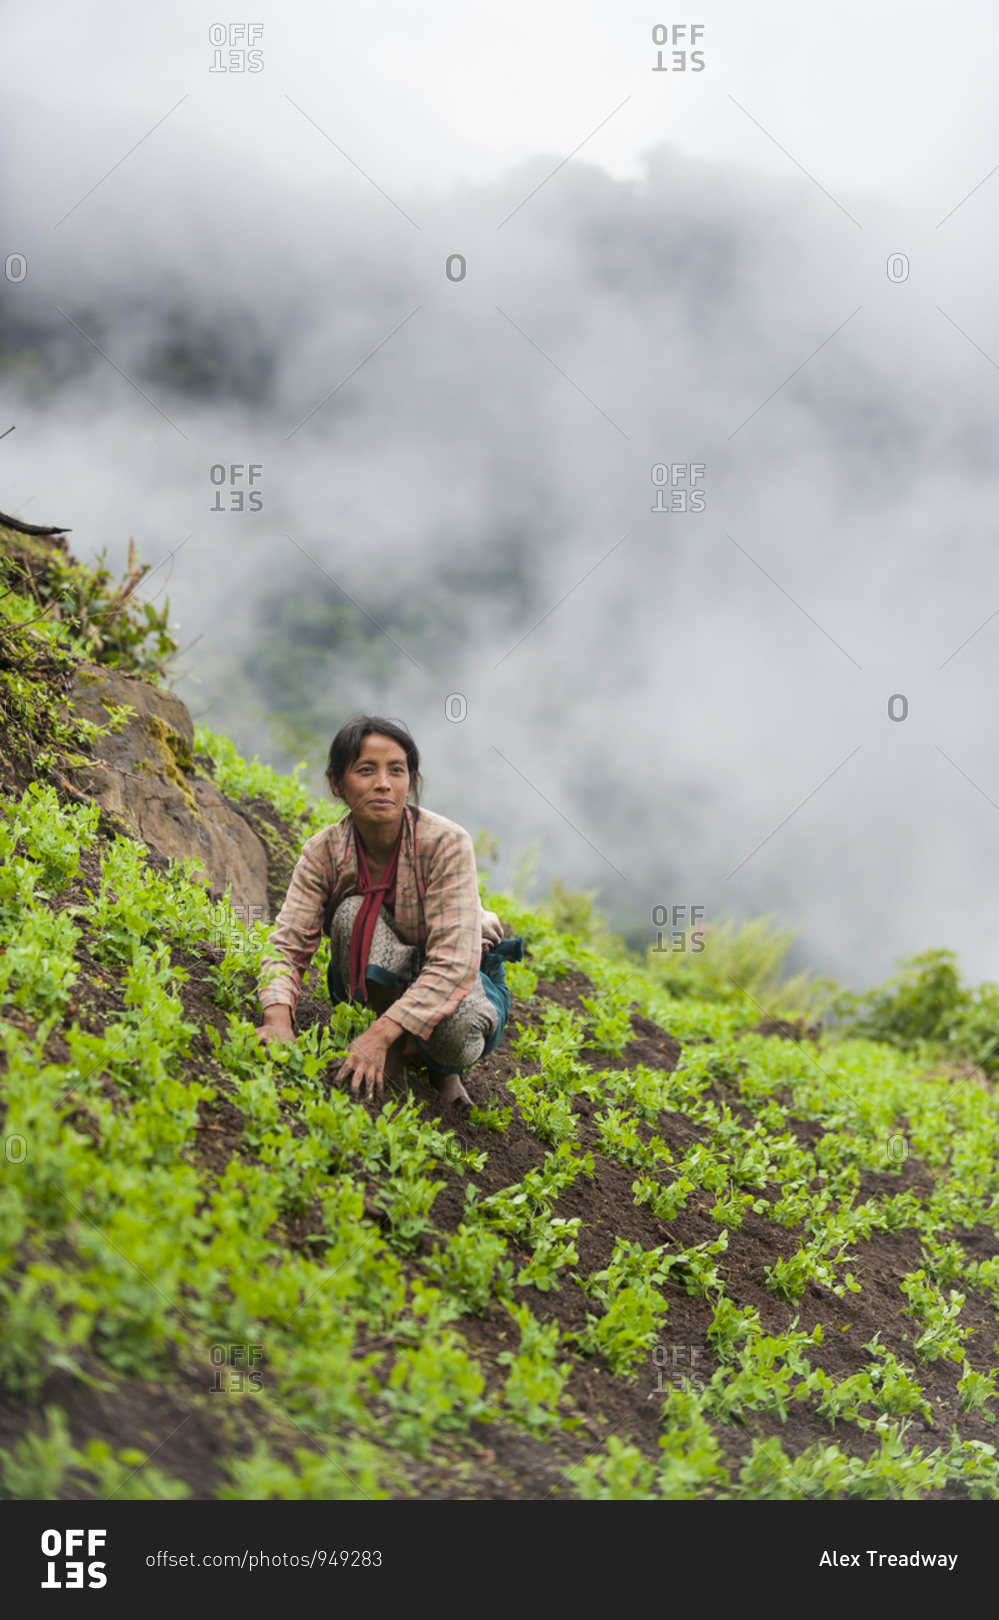 A woman clears away weeds in a pea field in north east India